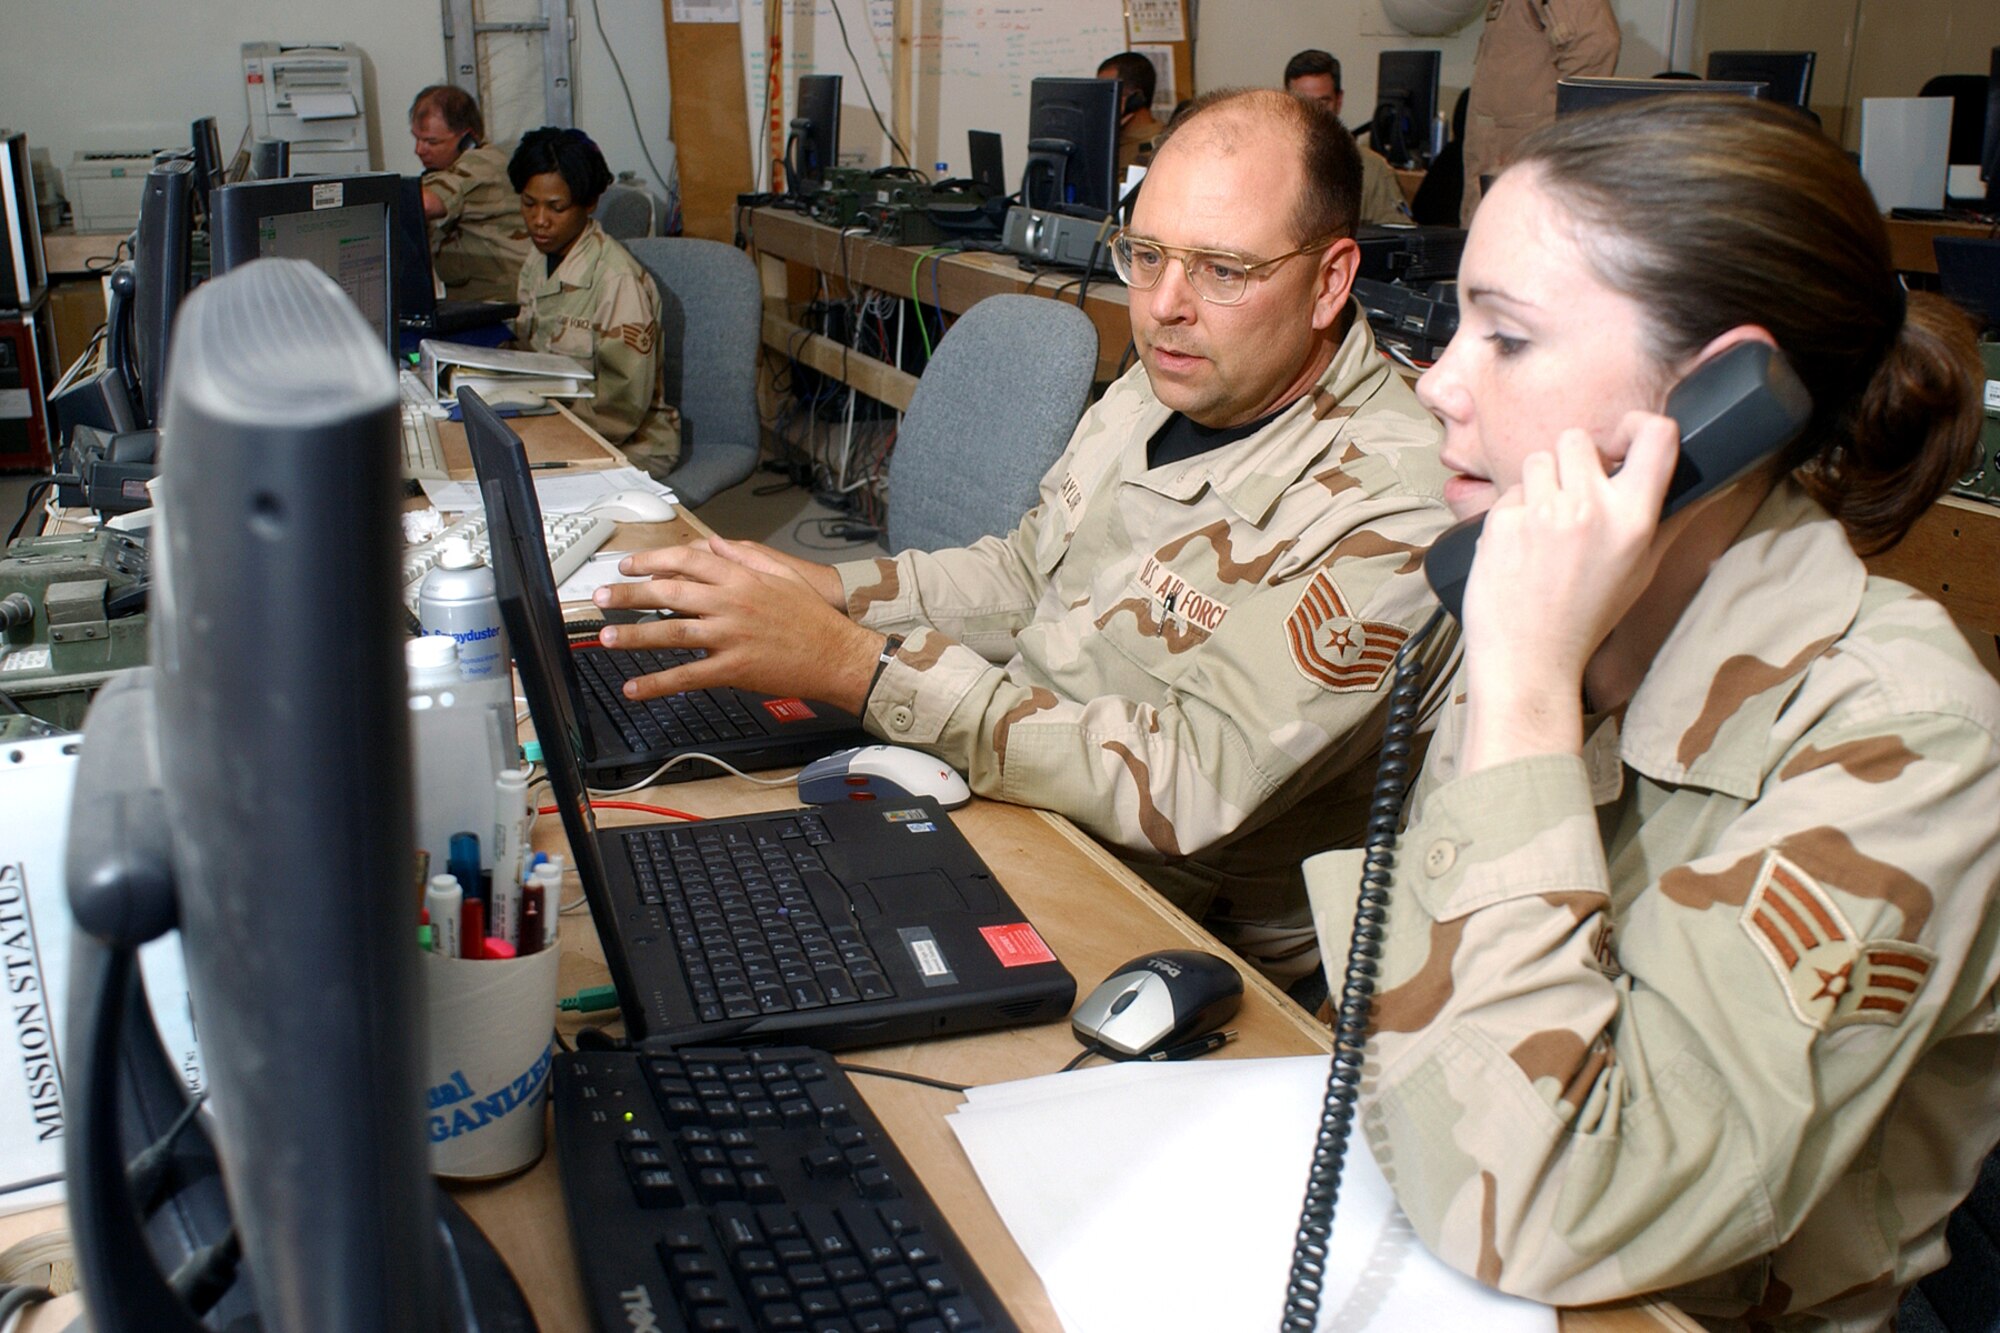 OPERATION IRAQI FREEDOM -- Tech. Sgt. Raymond Saylor and Senior Airman Kristina Degracia, Coalition Operations Center members, update sortie mission and flight filing.  Both are assigned to the 379 Air Expeditionary Wing at a deployed location. (U.S. Air Force by Master Sgt. Terry Blevins)